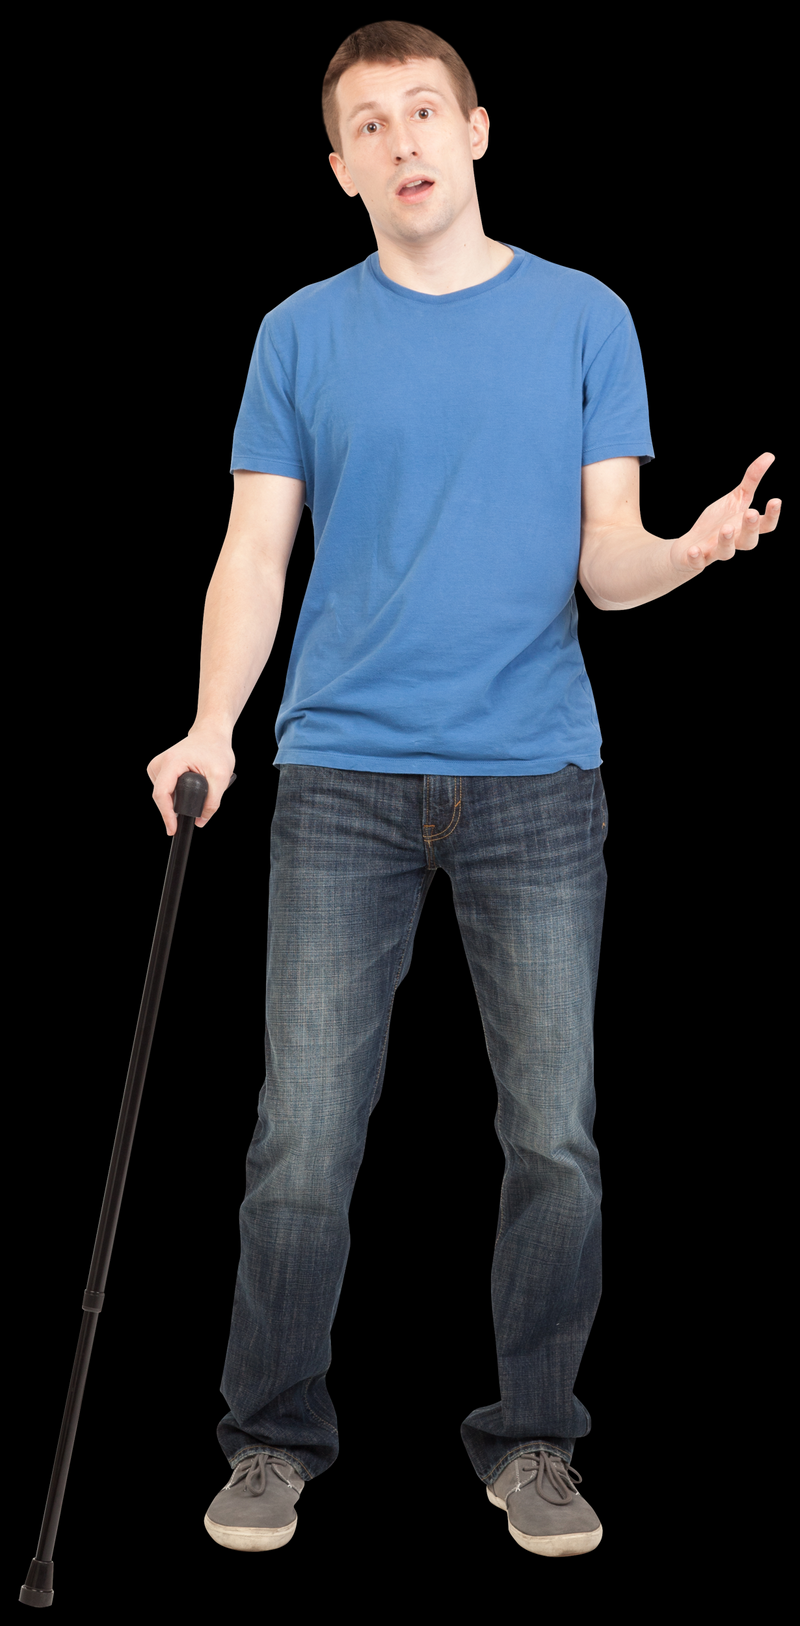 man wearing a blue T-shirt and blue jeans standing with a cane in one hand, his other arm is bent at the elbow and reaching out with that hand, with a somewhat surprised look on his face.